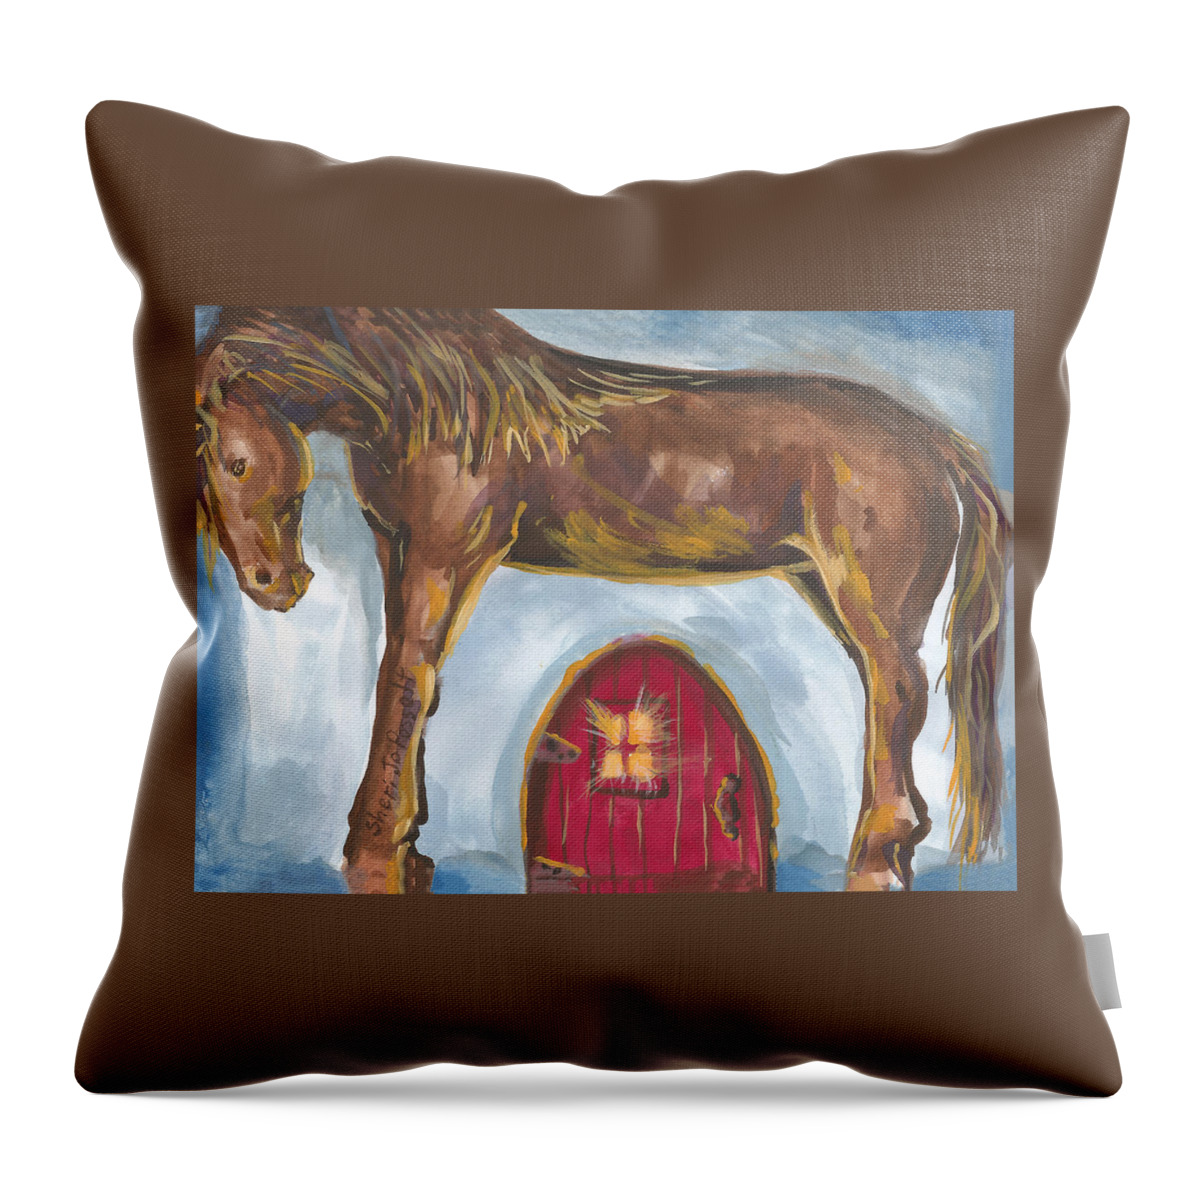 My Mane House Throw Pillow featuring the painting My Mane House by Sheri Jo Posselt